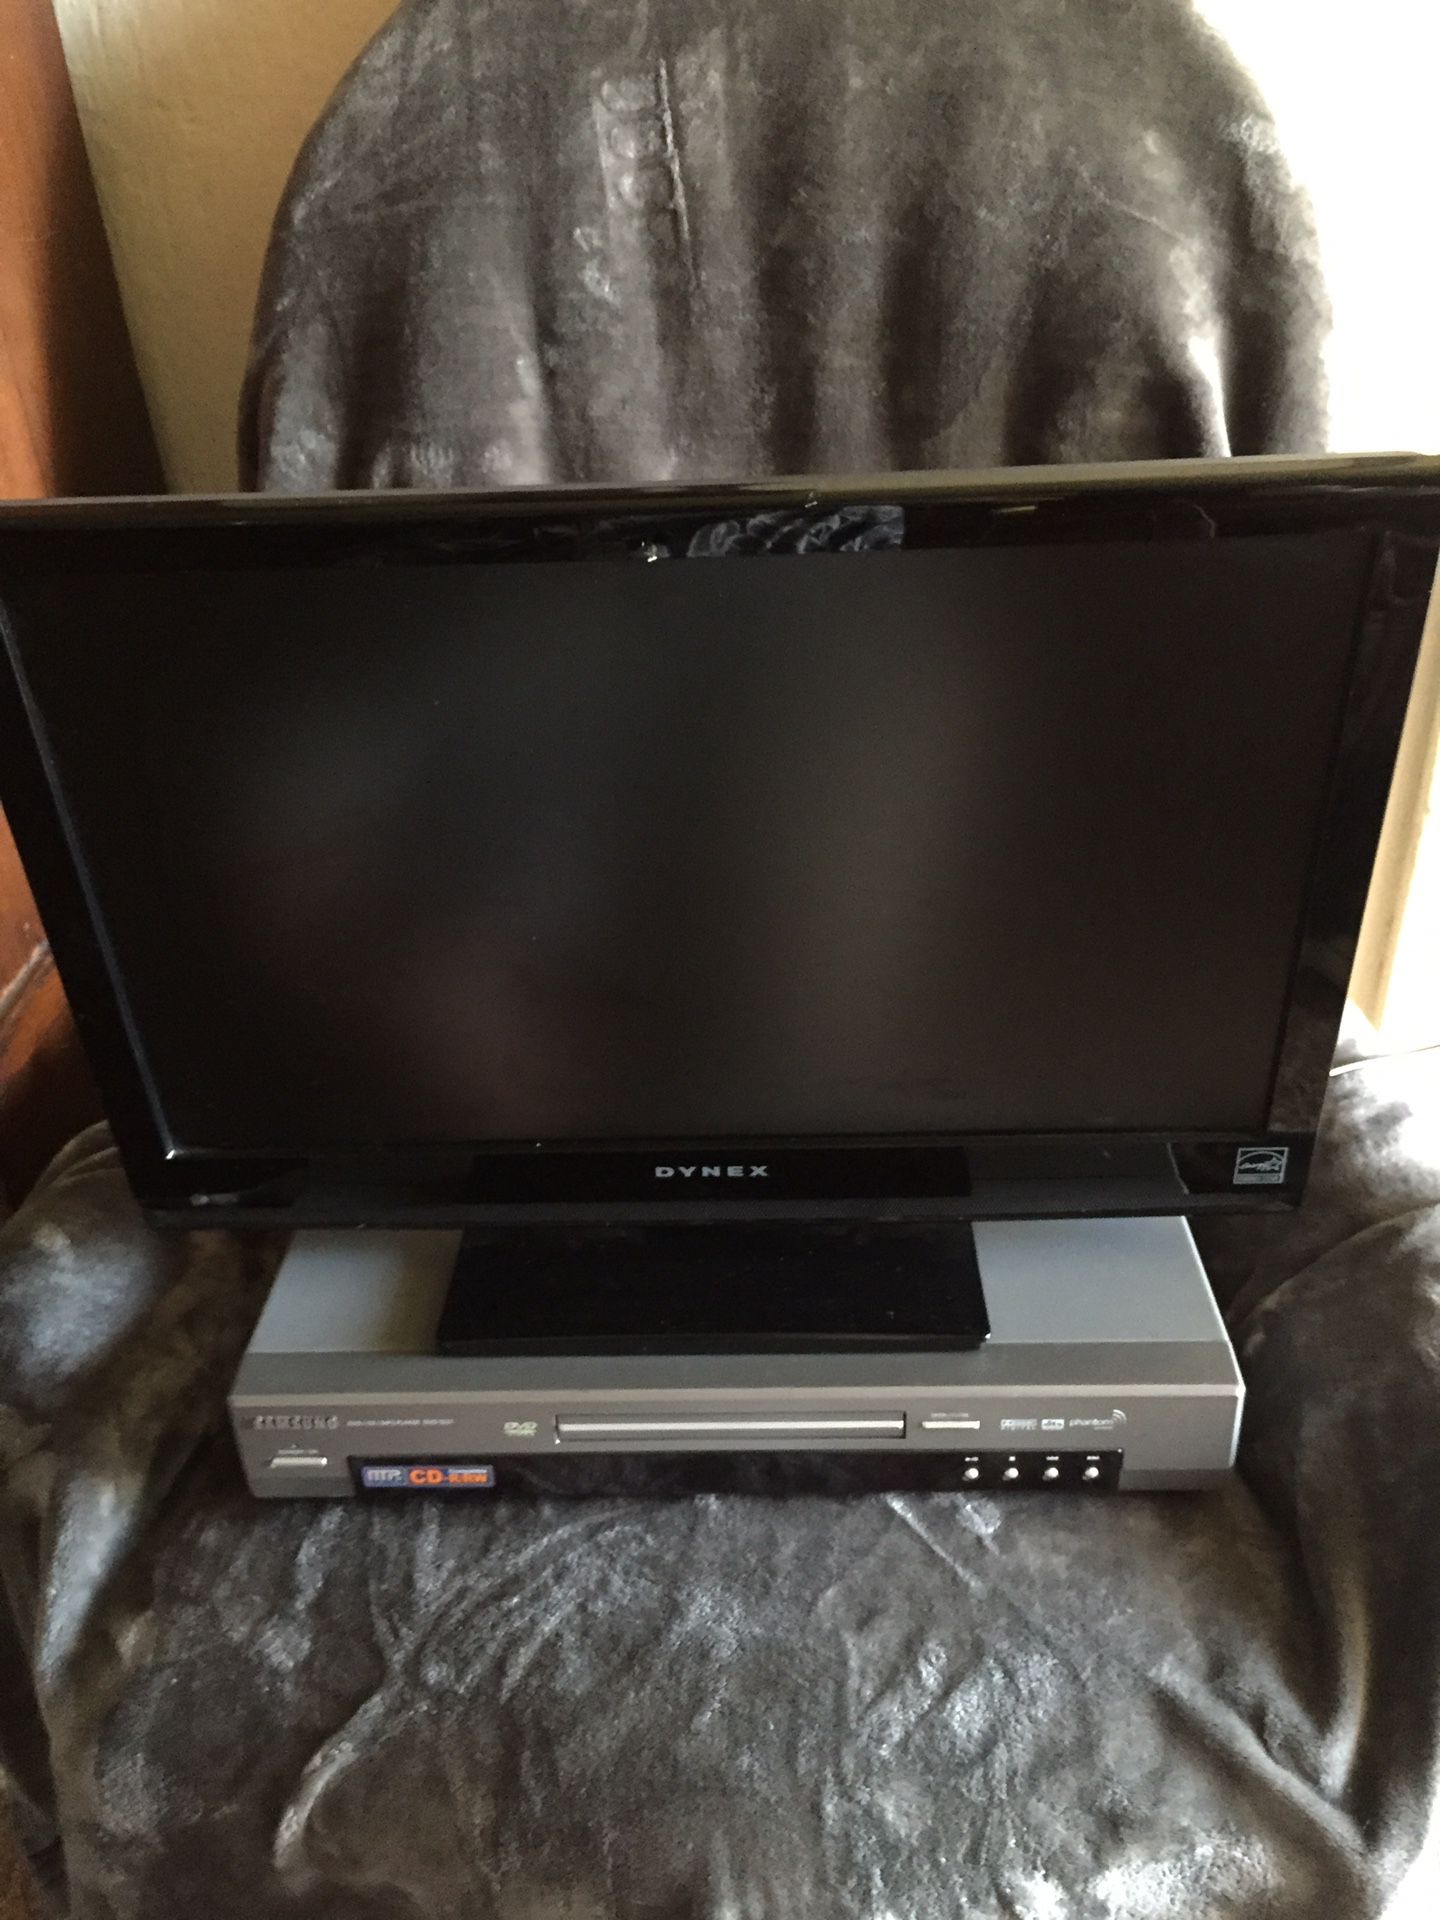 TV AND DVD PLAYER $12 GOOD CONDITION GREAT FOR KIDS TO WATCH MOVIES see my other items for sale